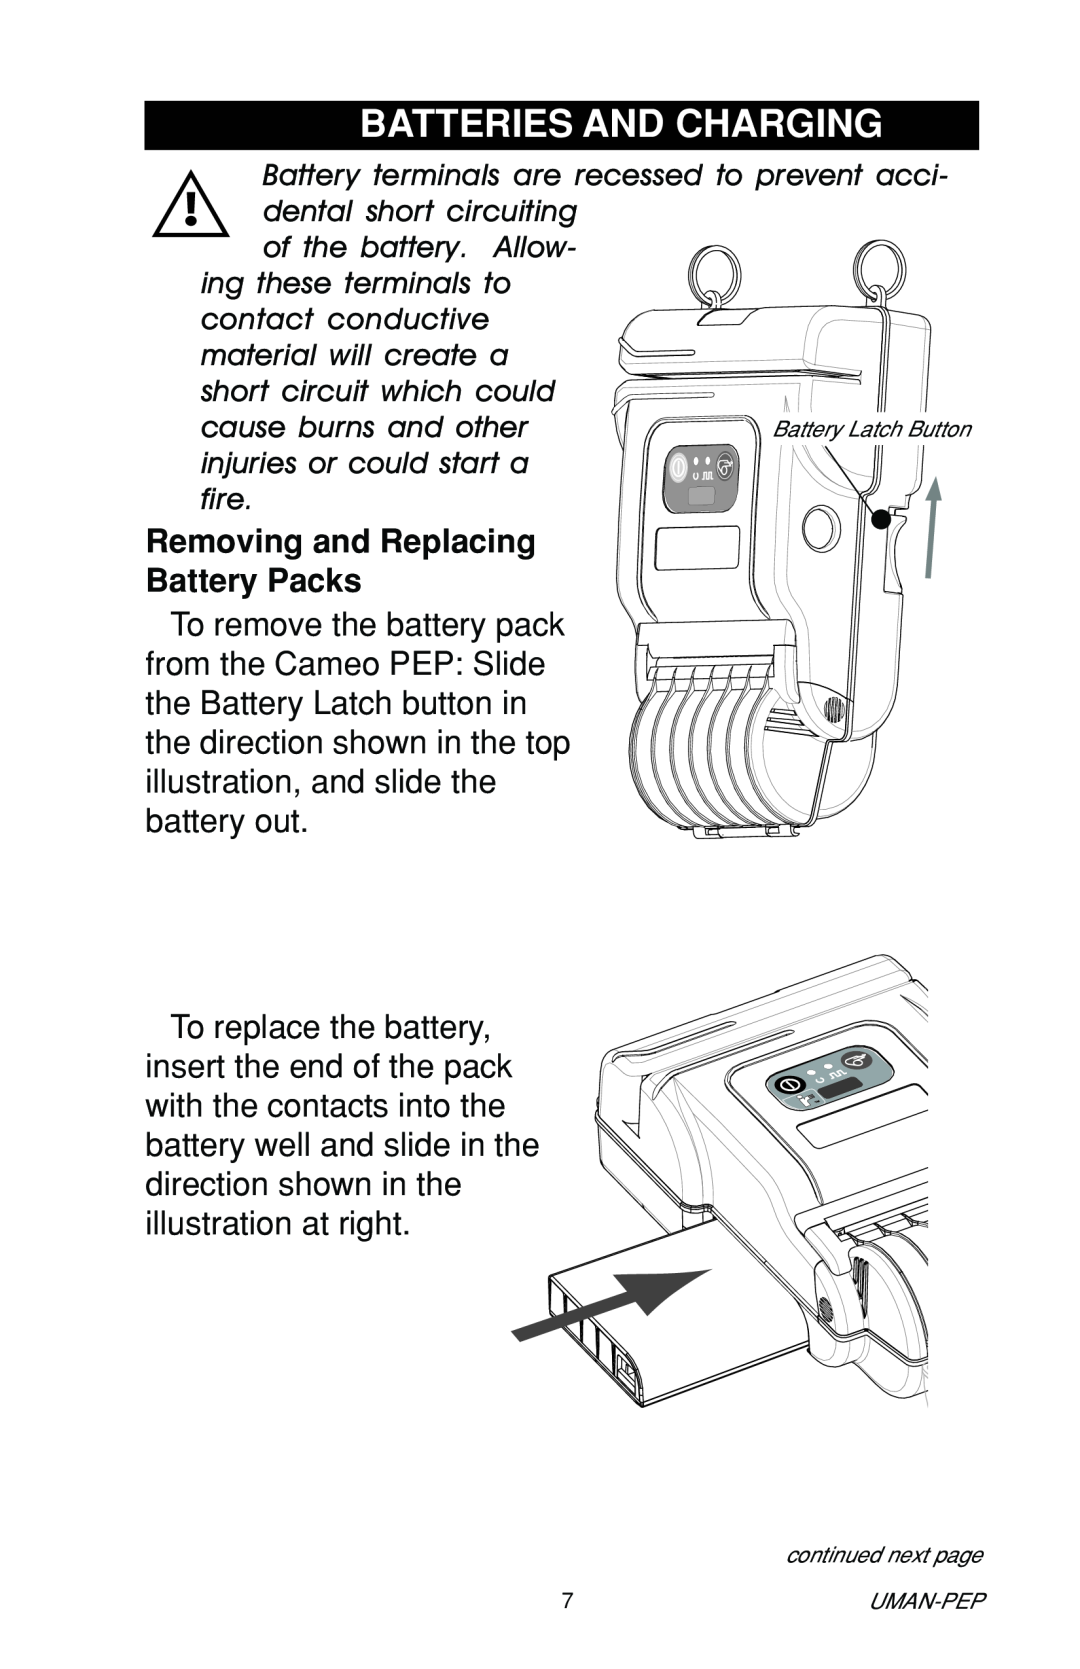 Zebra Technologies Portable Encoding Printer user manual Batteries And Charging, Removing and Replacing Battery Packs 